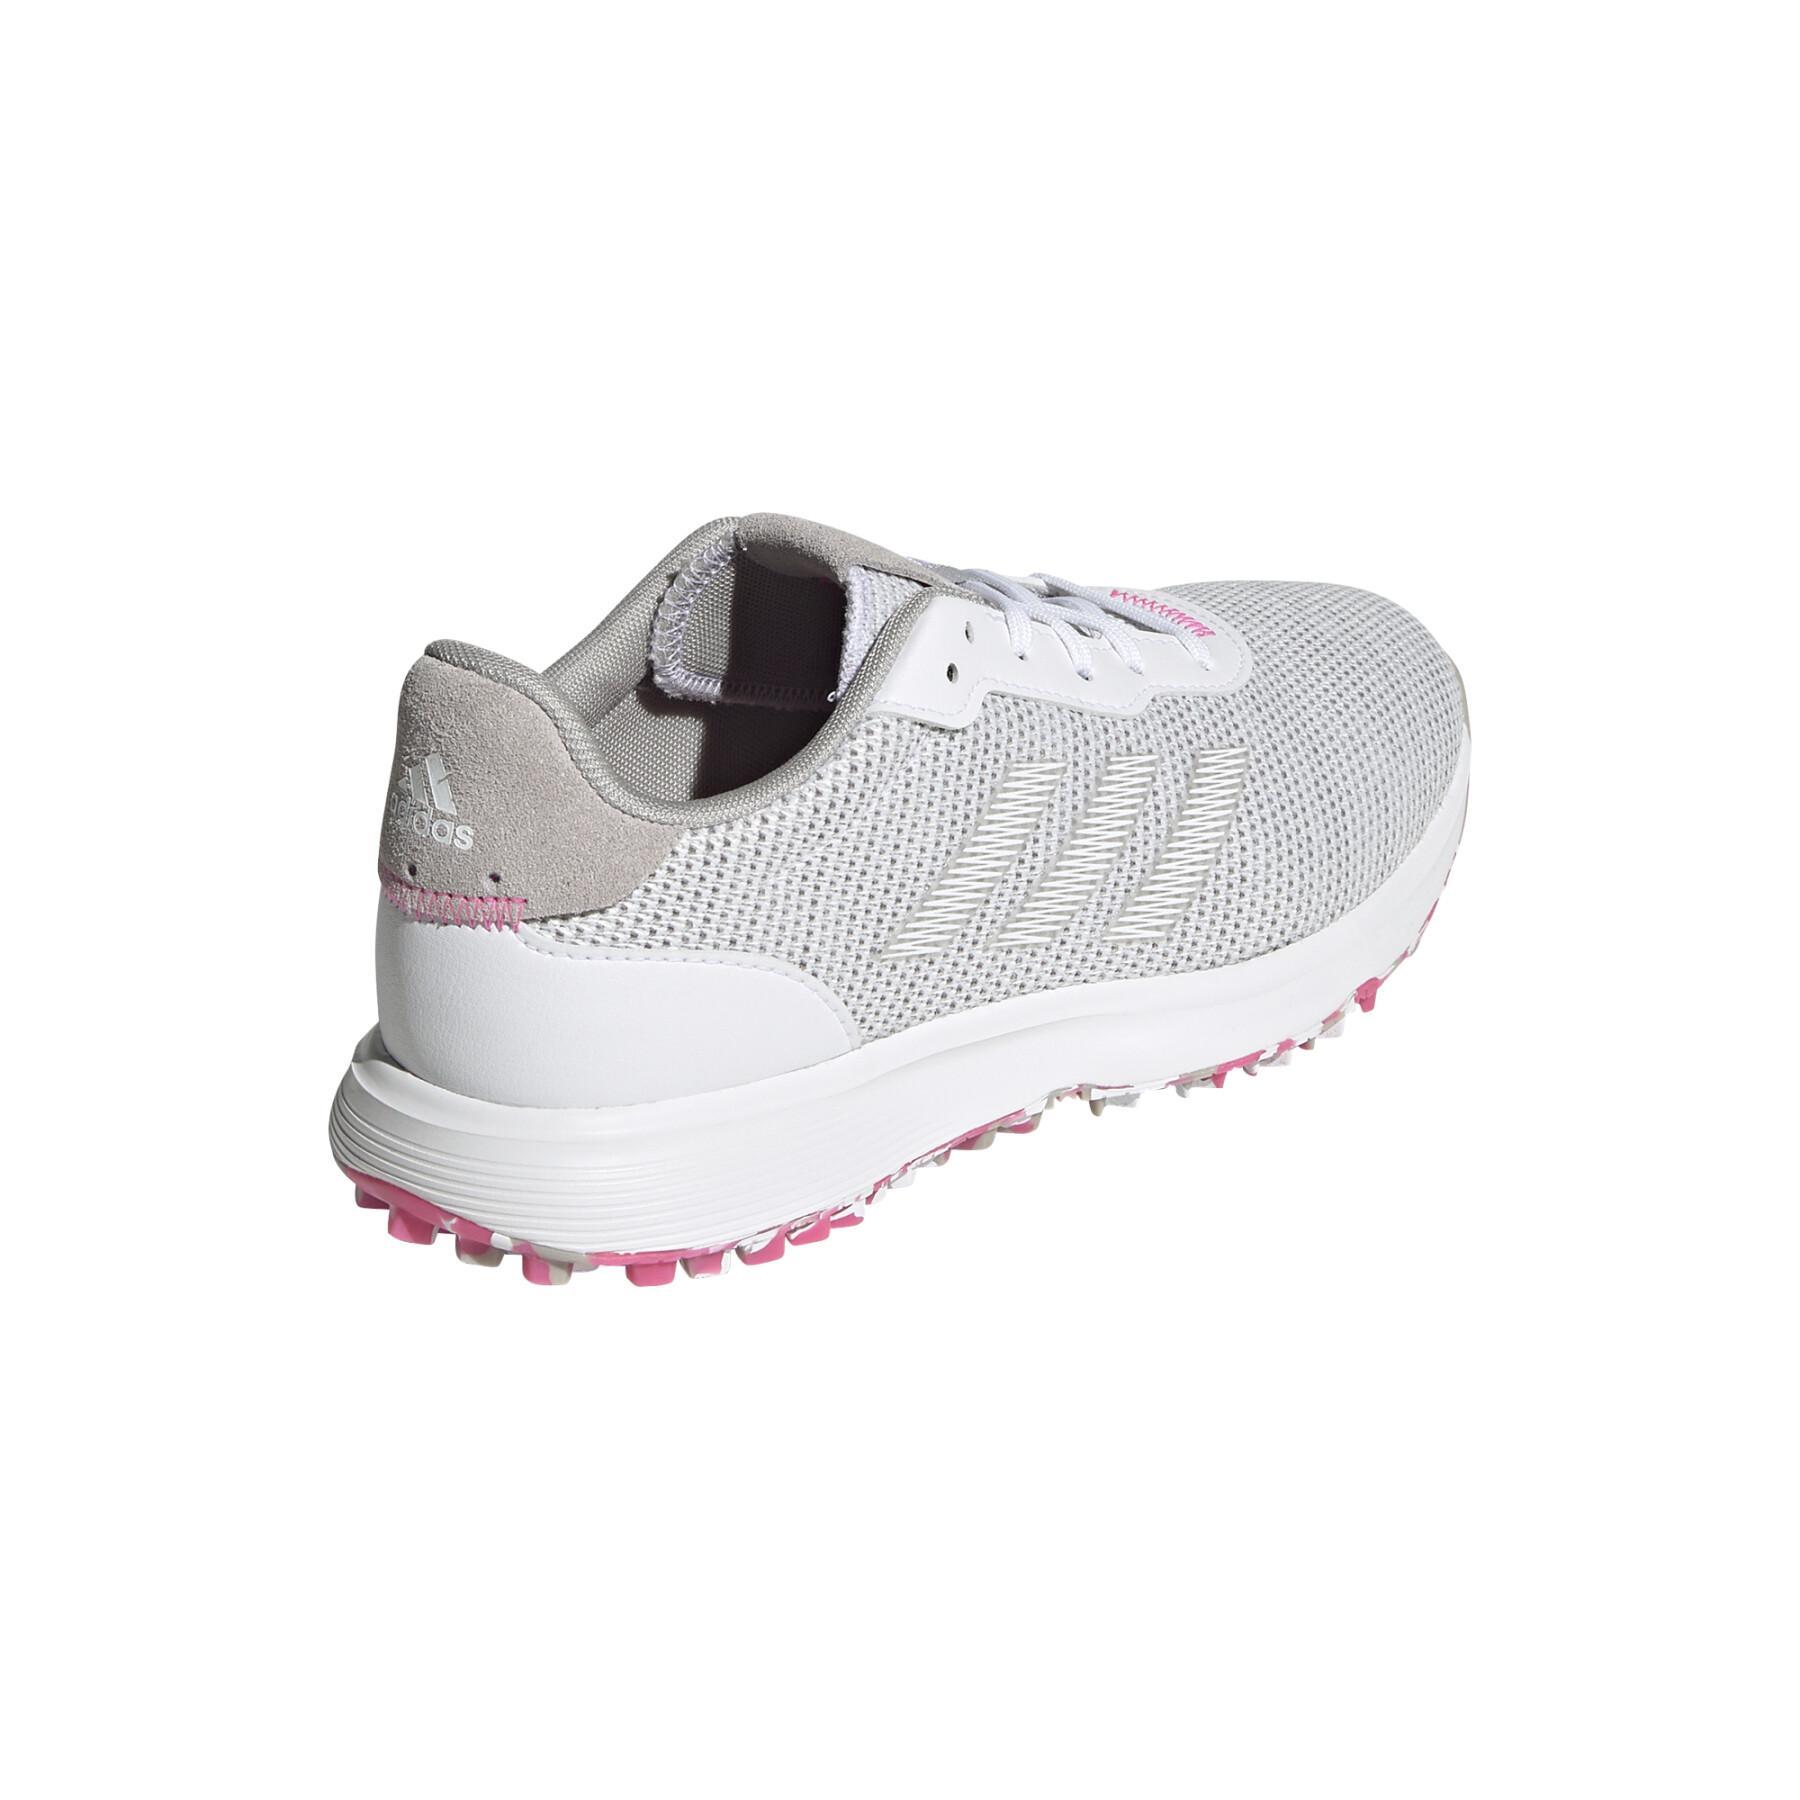 Chaussures femme adidas S2G